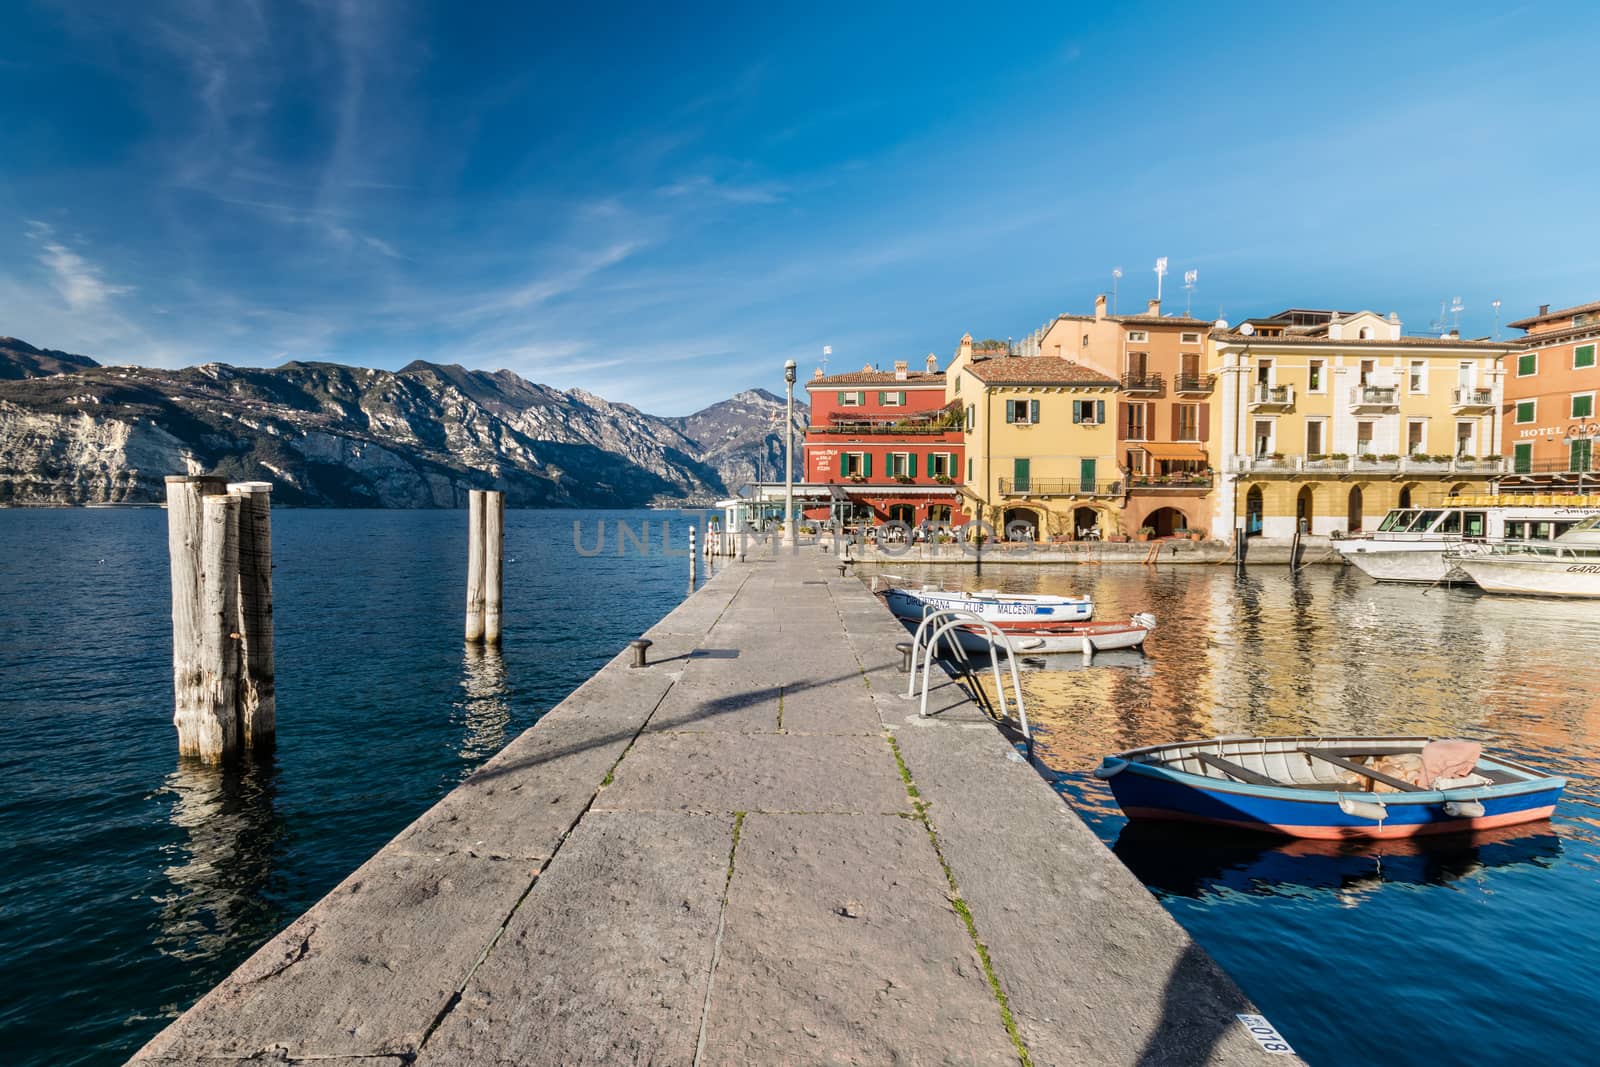 Malcesine, Italy - January 18, 2016: Malcesine is a small town on Lake Garda (Italy). Beautiful and picturesque is called "the pearl of the lake".